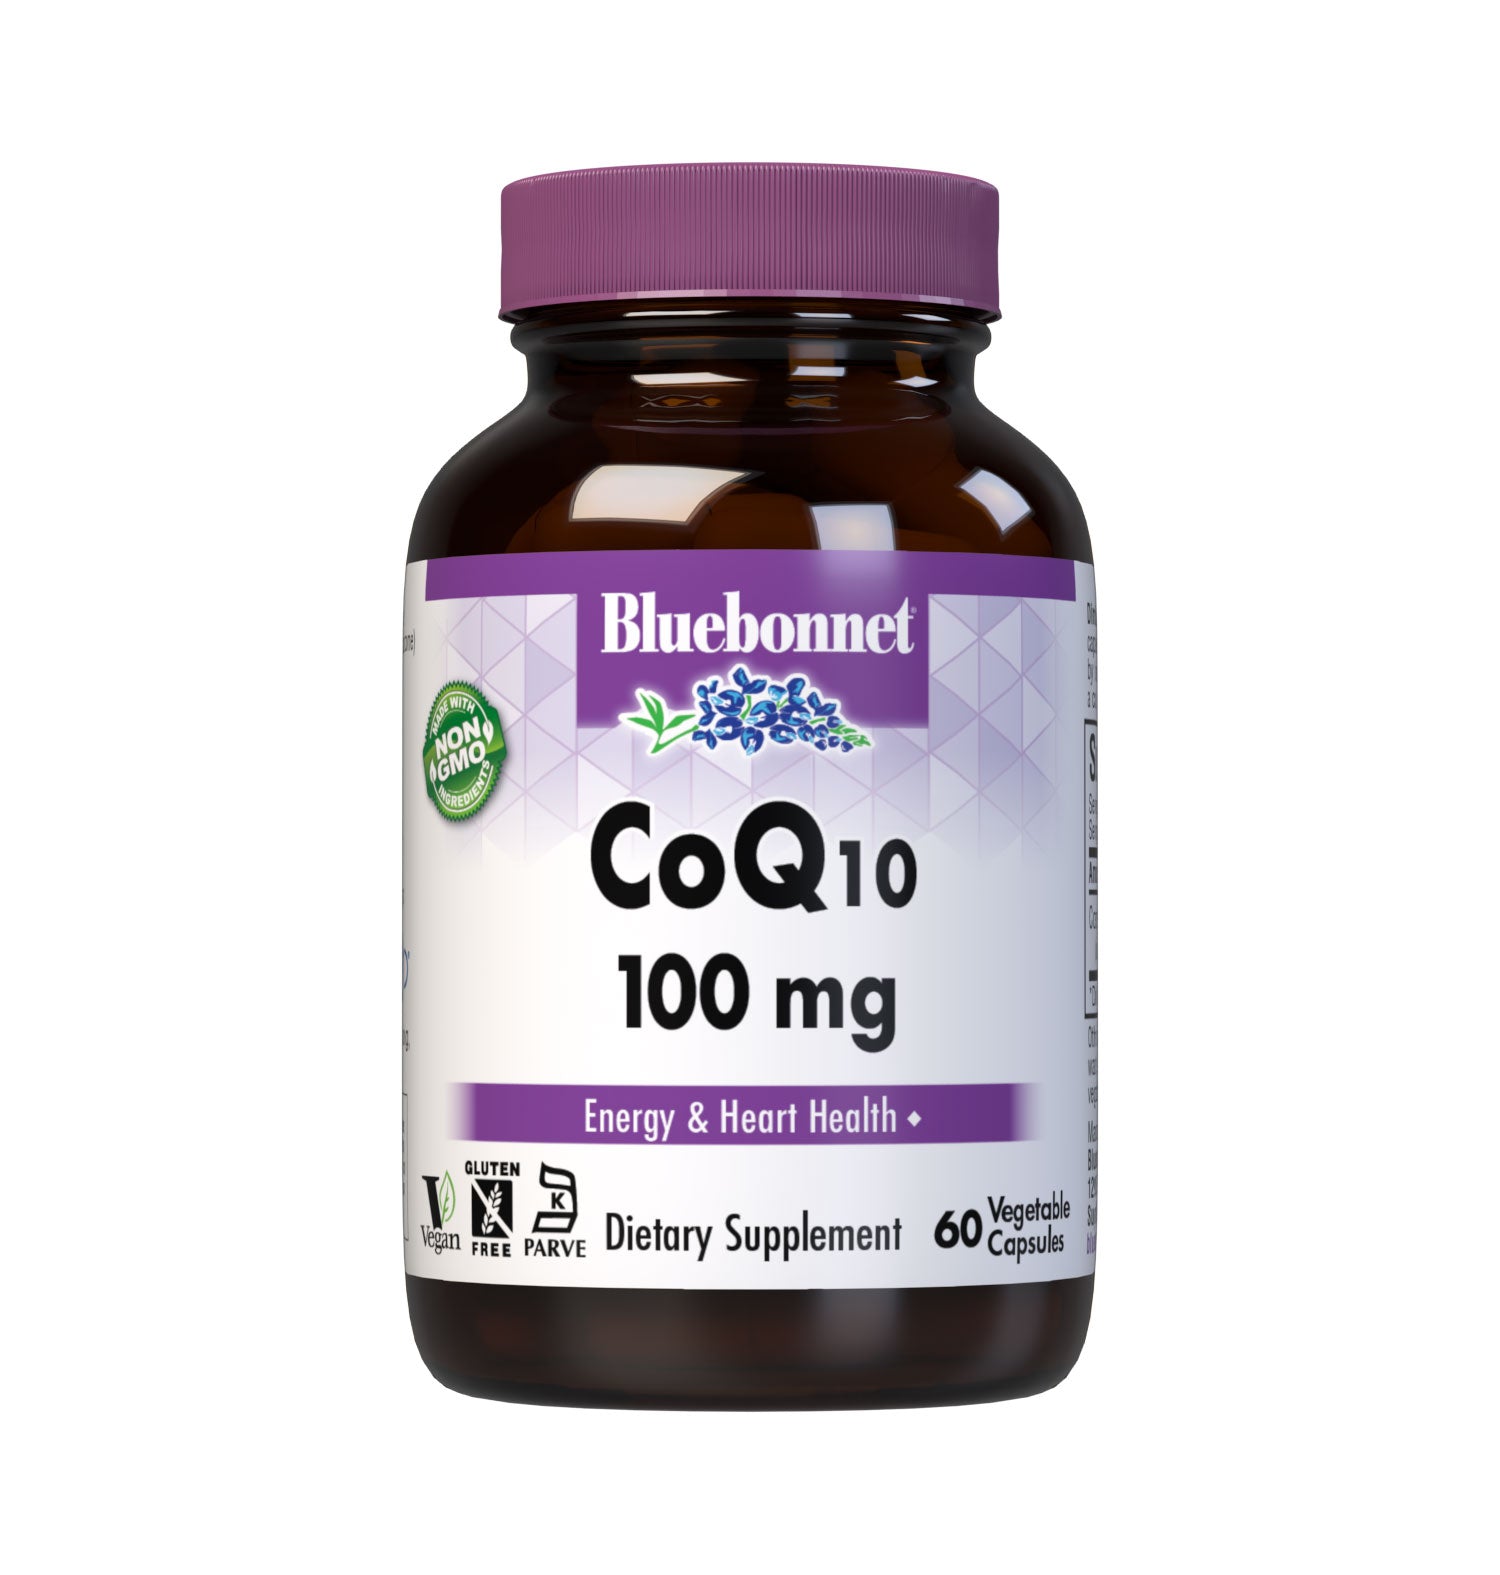 Bluebonnet’s CoQ10 100 mg 60 Vegetable Capsules provide 100% “trans-isomer” coenzyme Q10. Available in easy-to-swallow vegetable capsules for maximum assimilation and absorption. #size_60 count